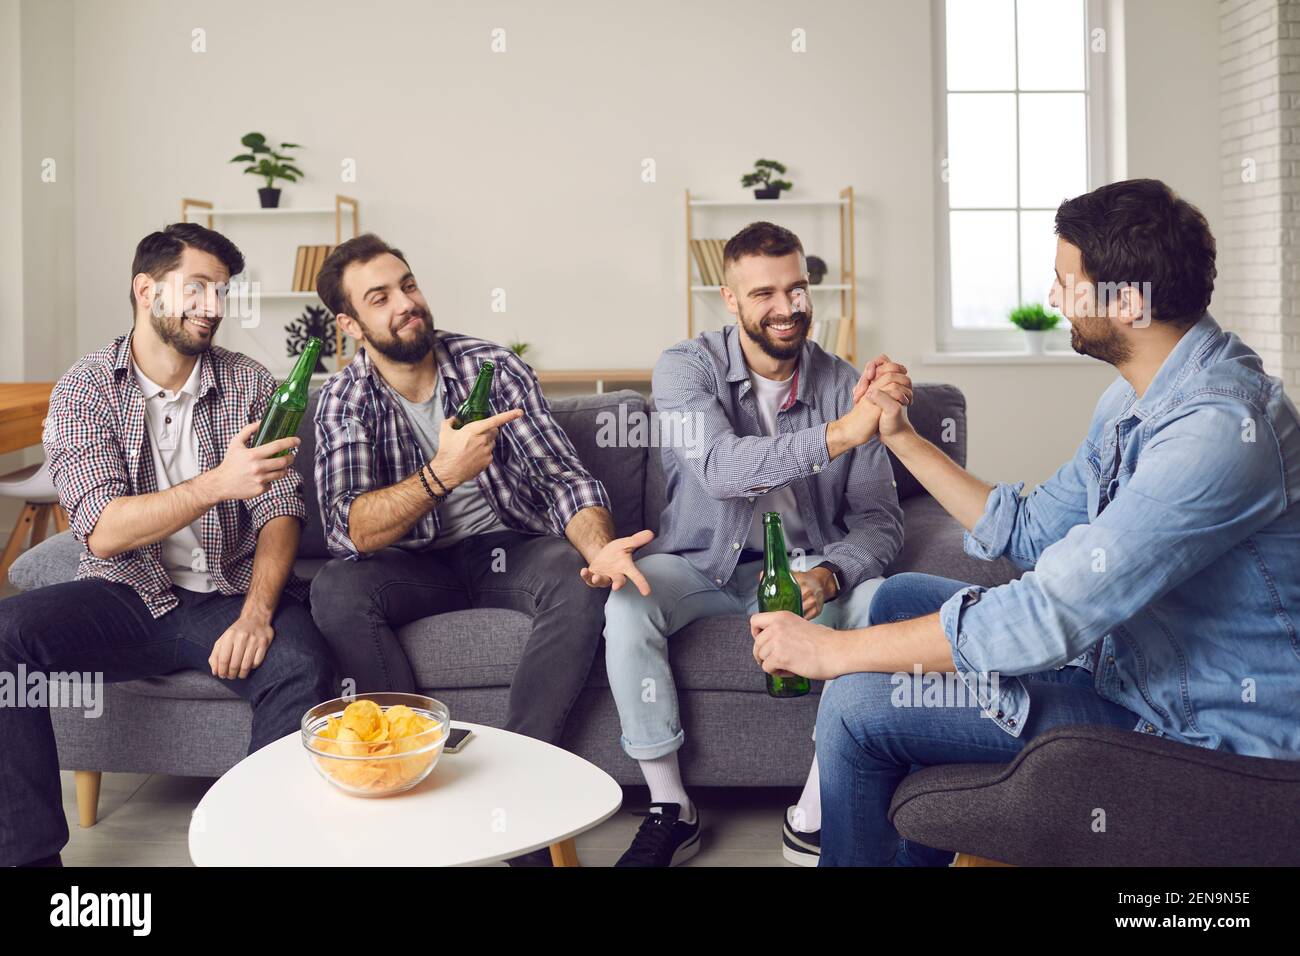 Group of friends sitting on couch, drinking beer and making fun bets with each other Stock Photo